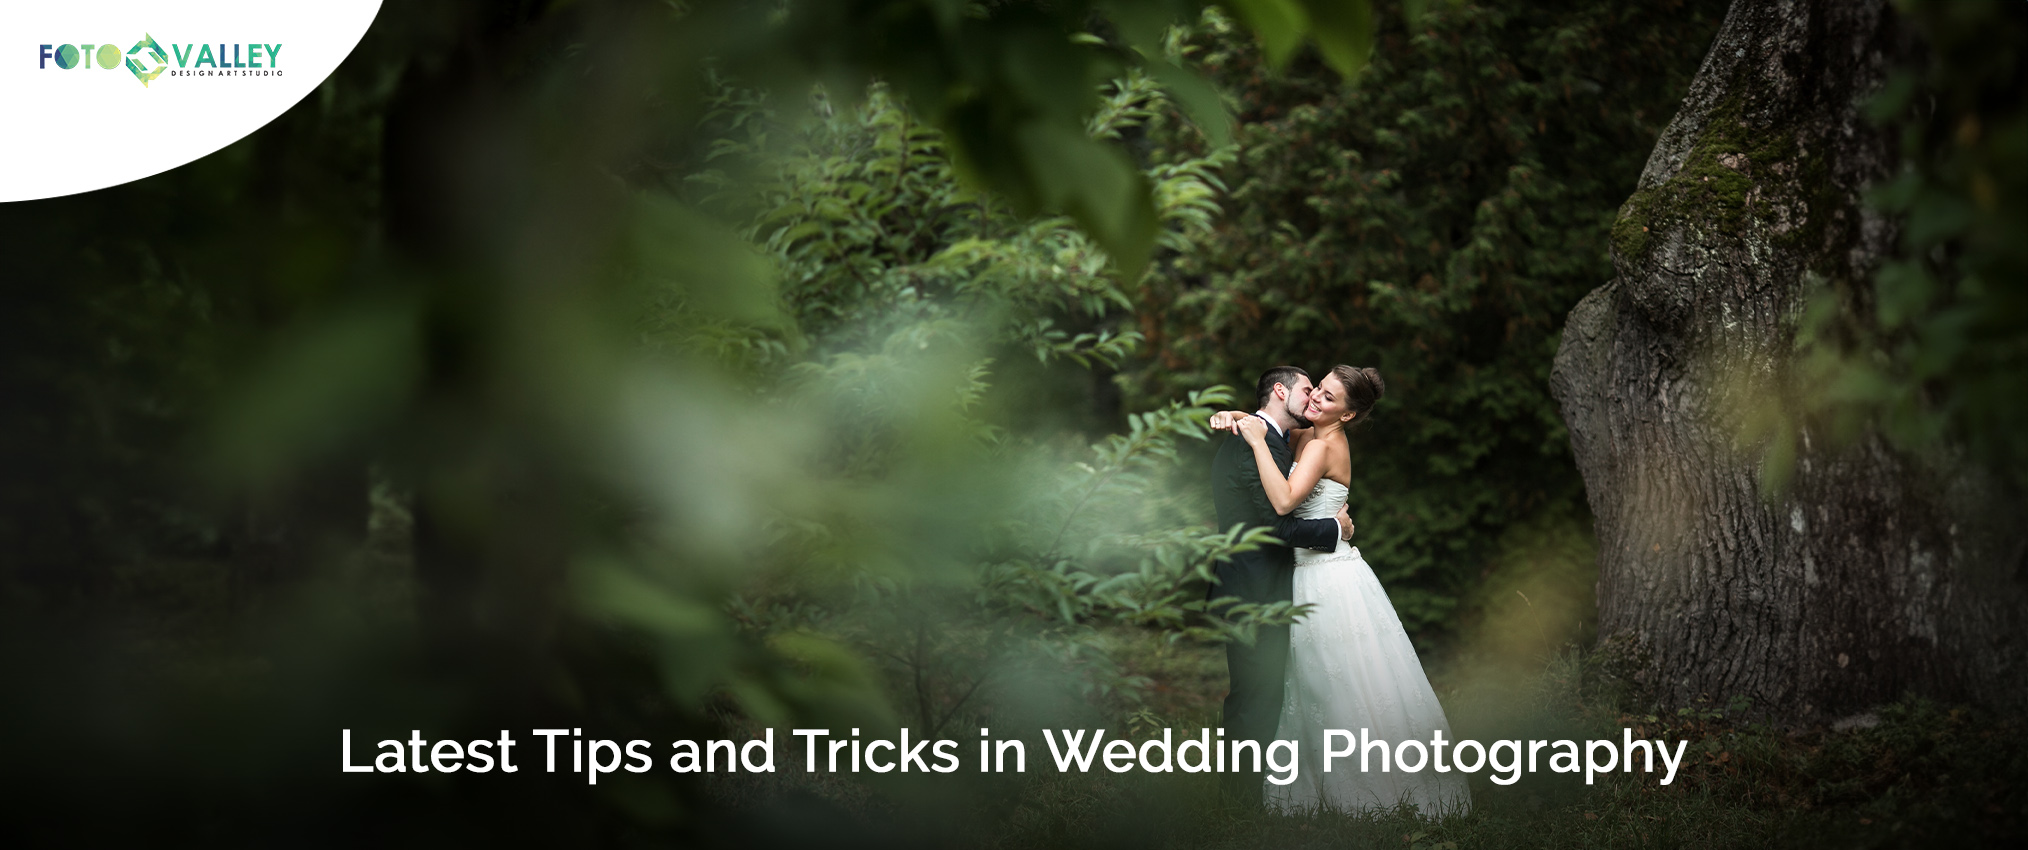 Latest Tips and Tricks in Wedding Photography